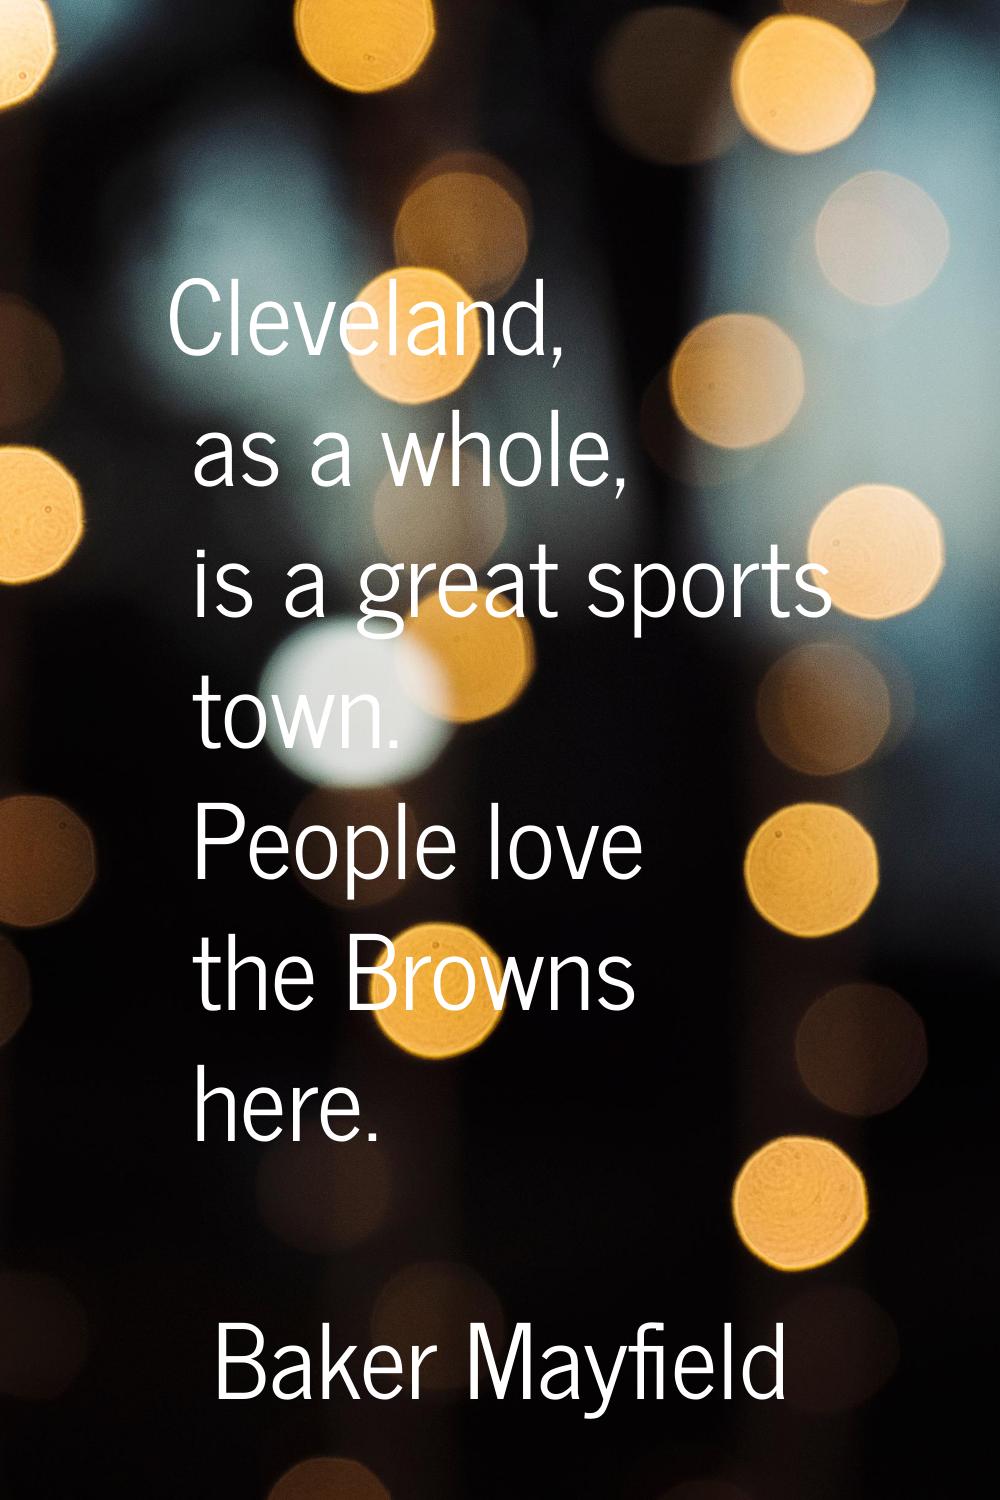 Cleveland, as a whole, is a great sports town. People love the Browns here.